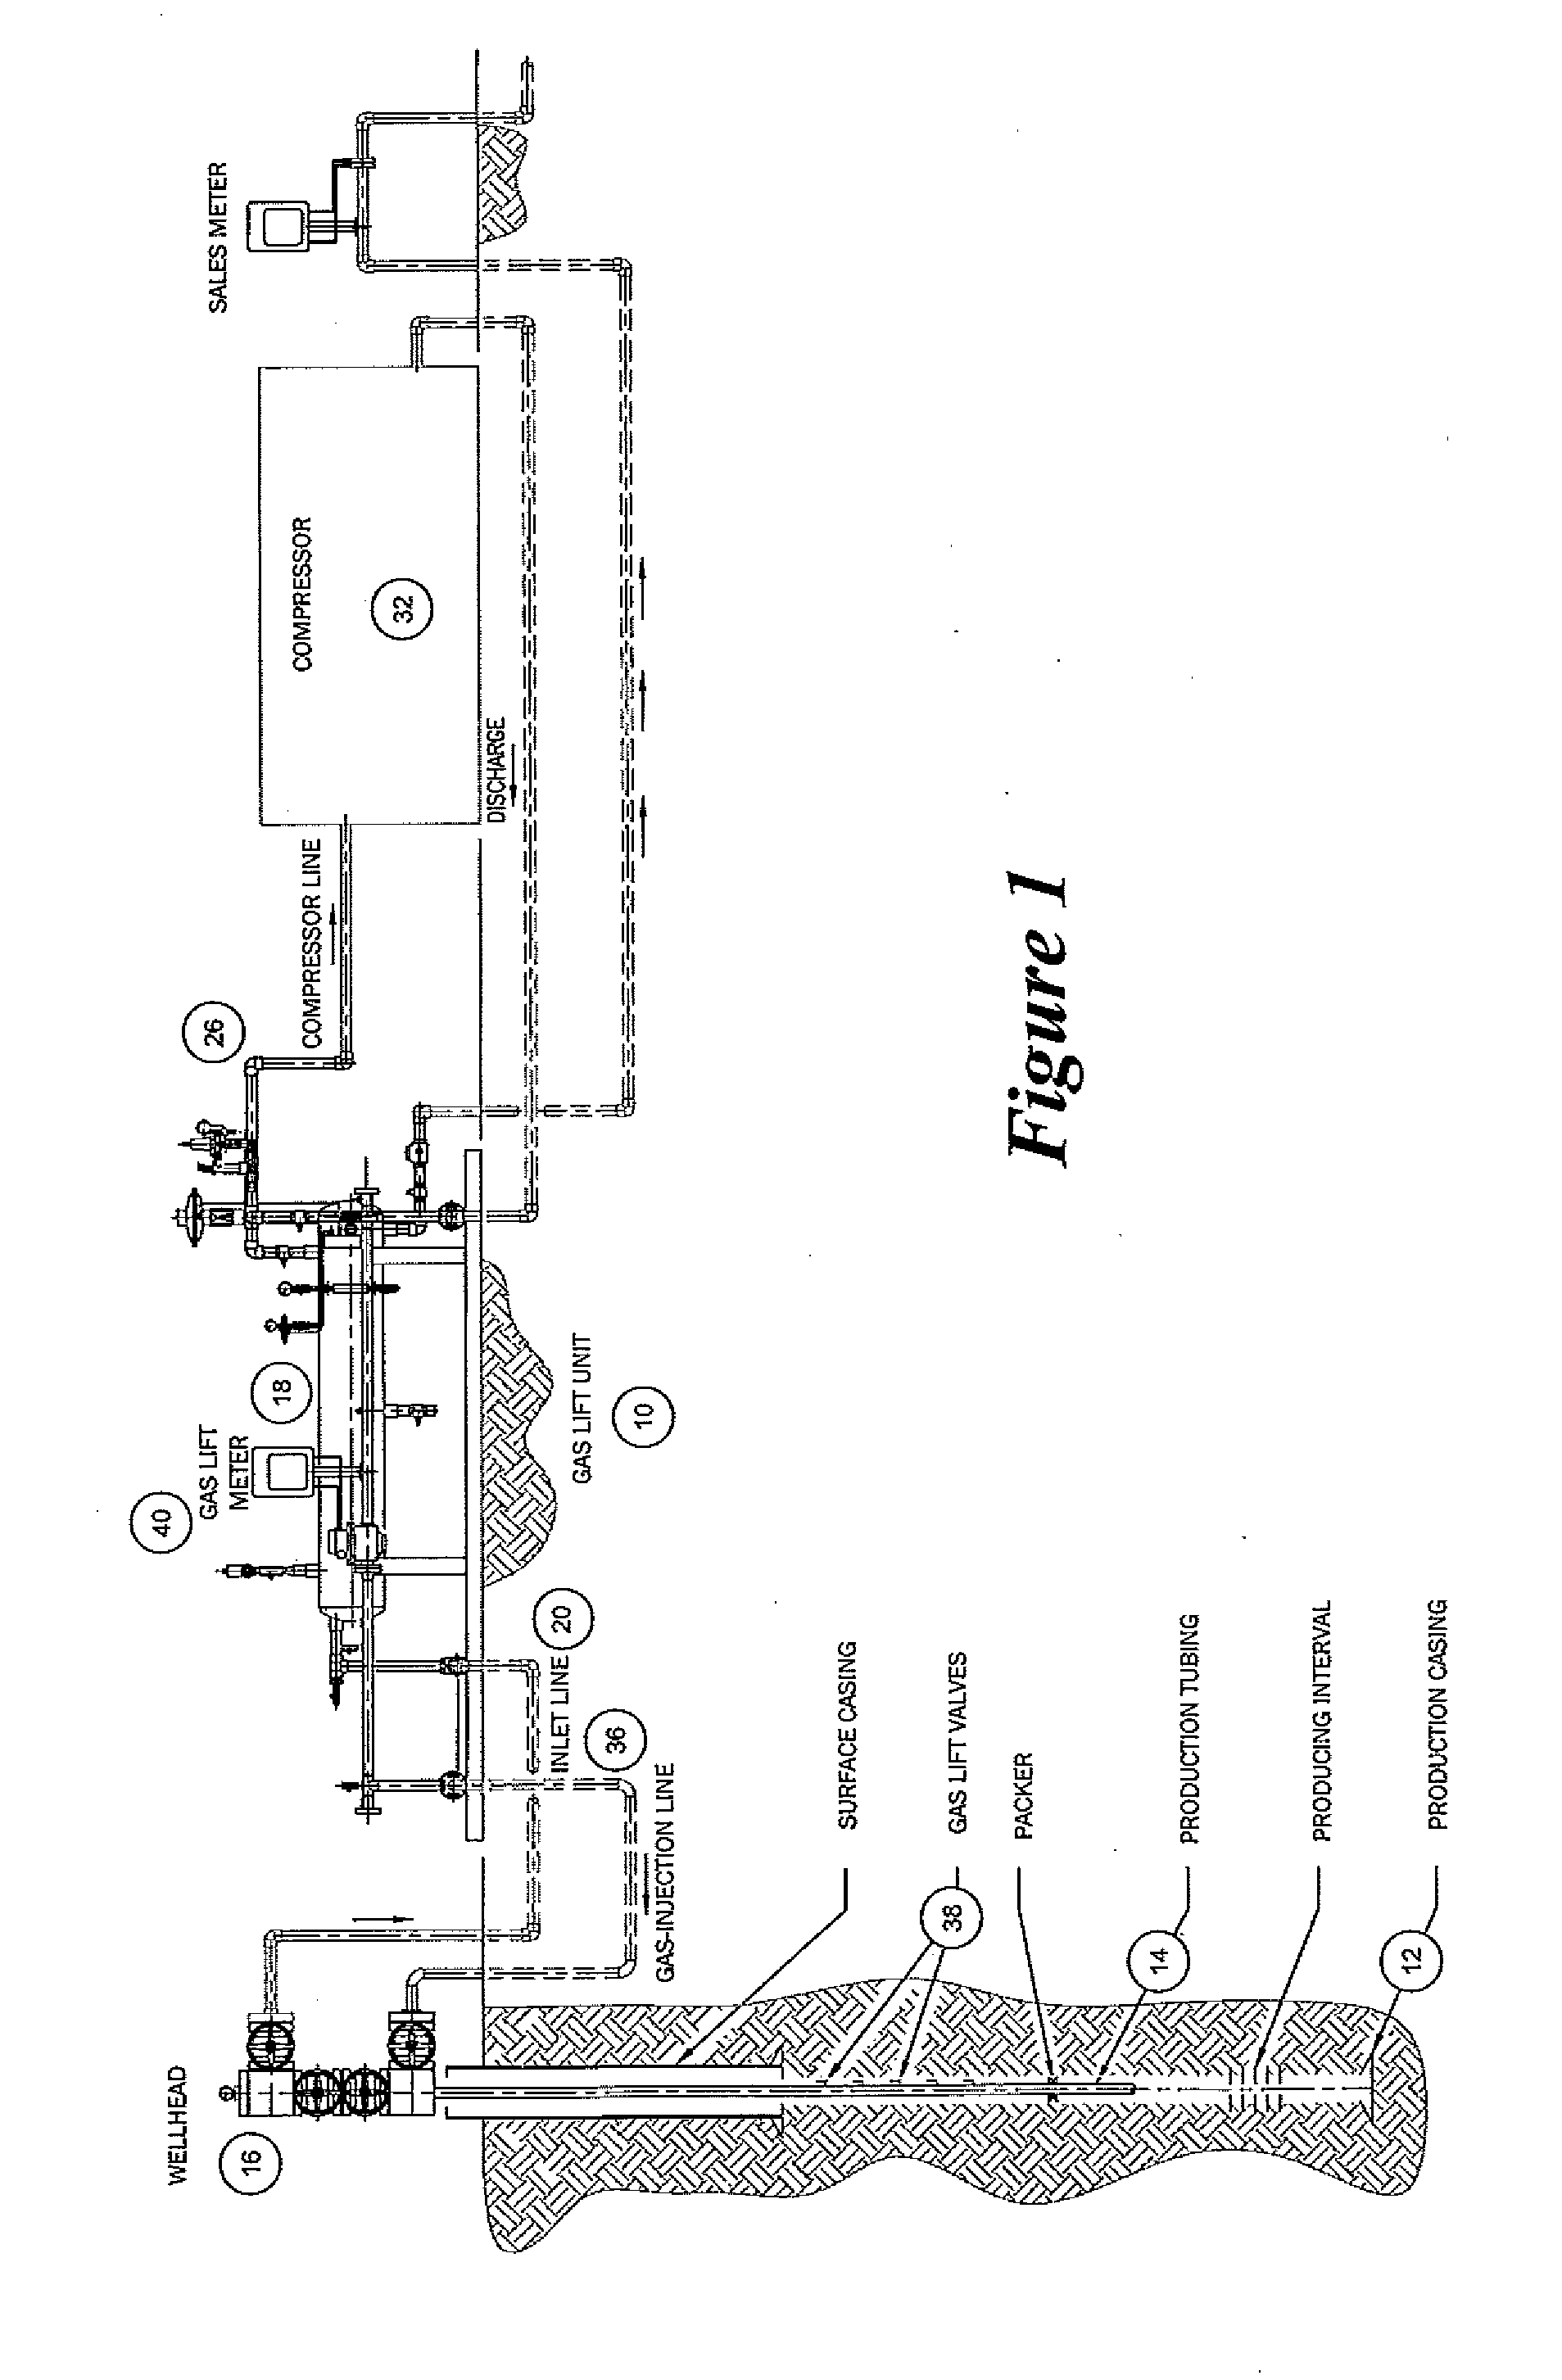 System and Method for Optimizing Production in Gas-Lift Wells